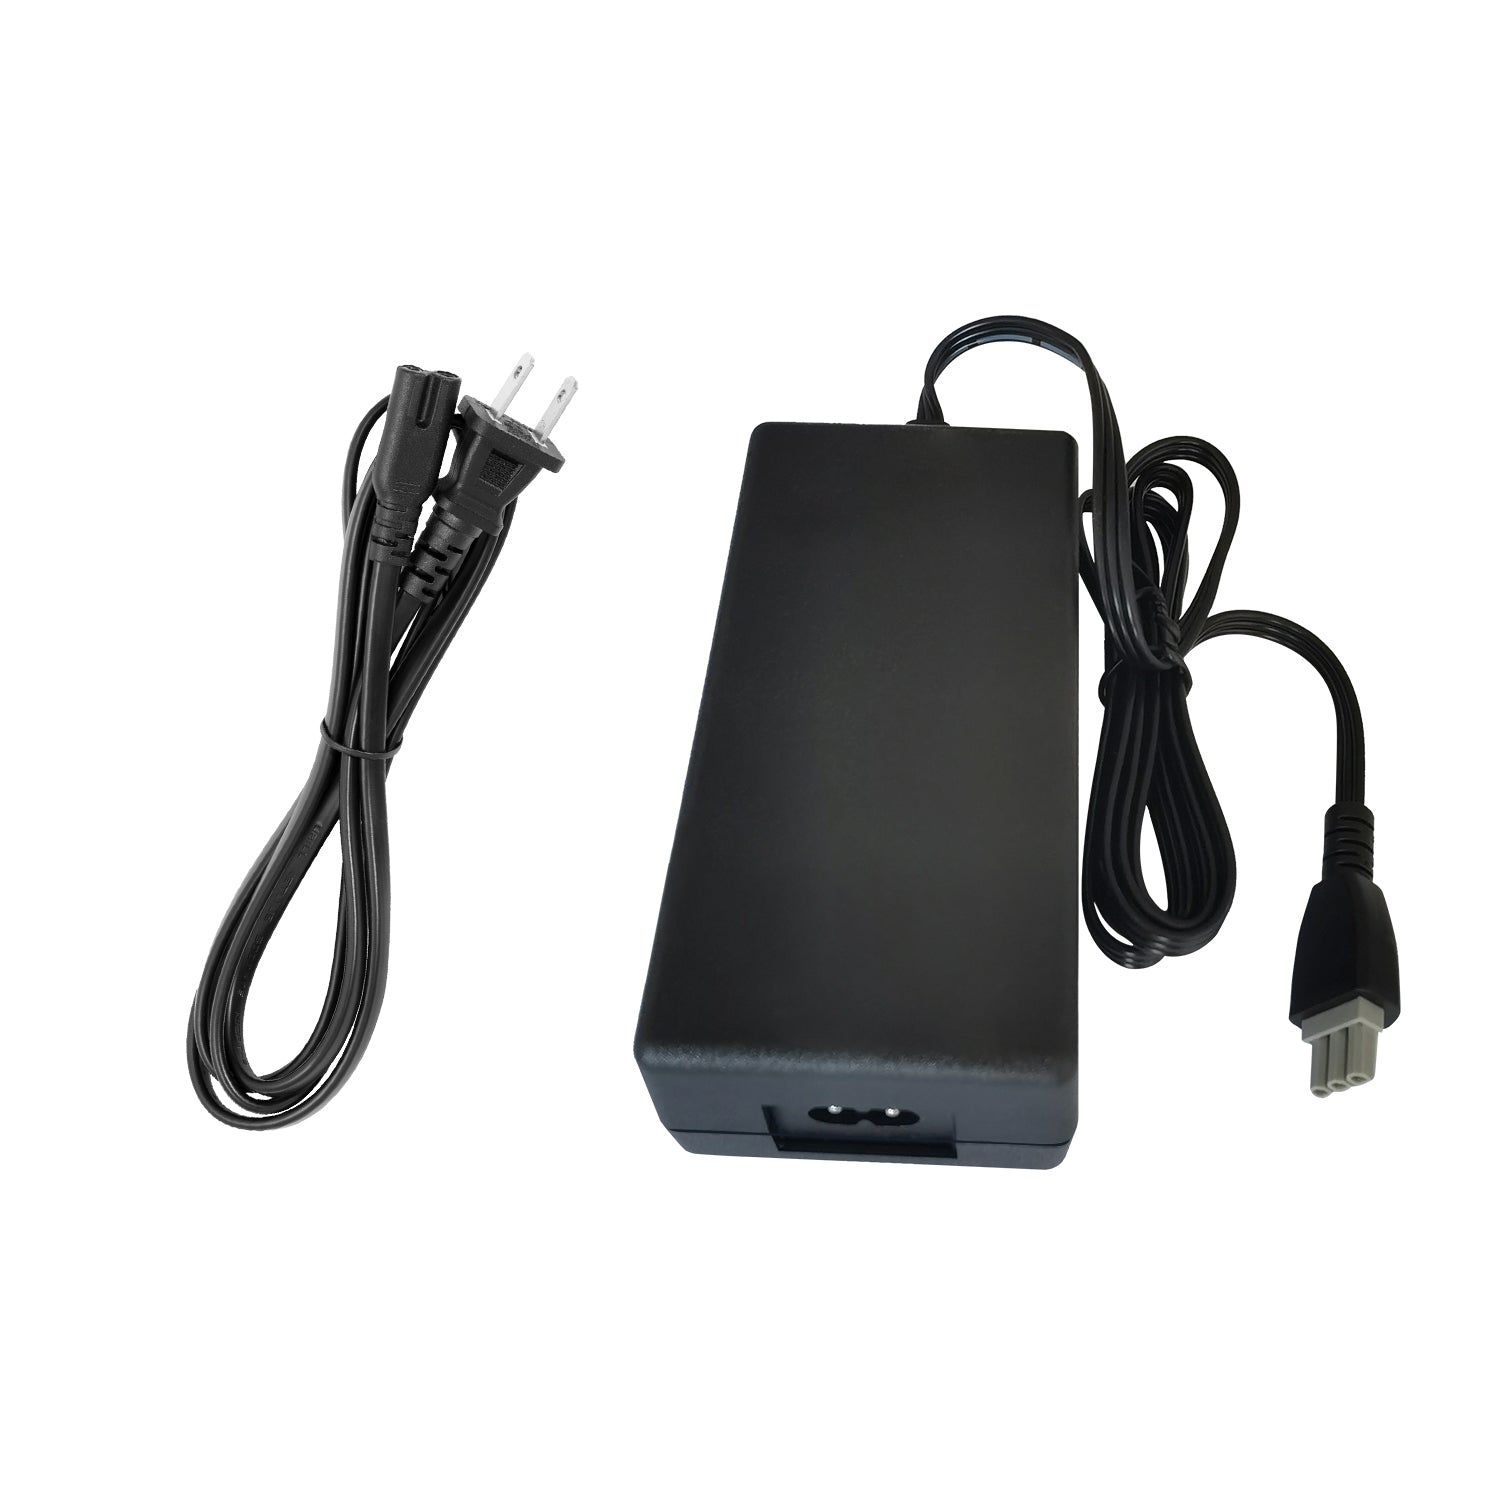 Power Adapter for HP PSC 1408 All-in-One Printer.